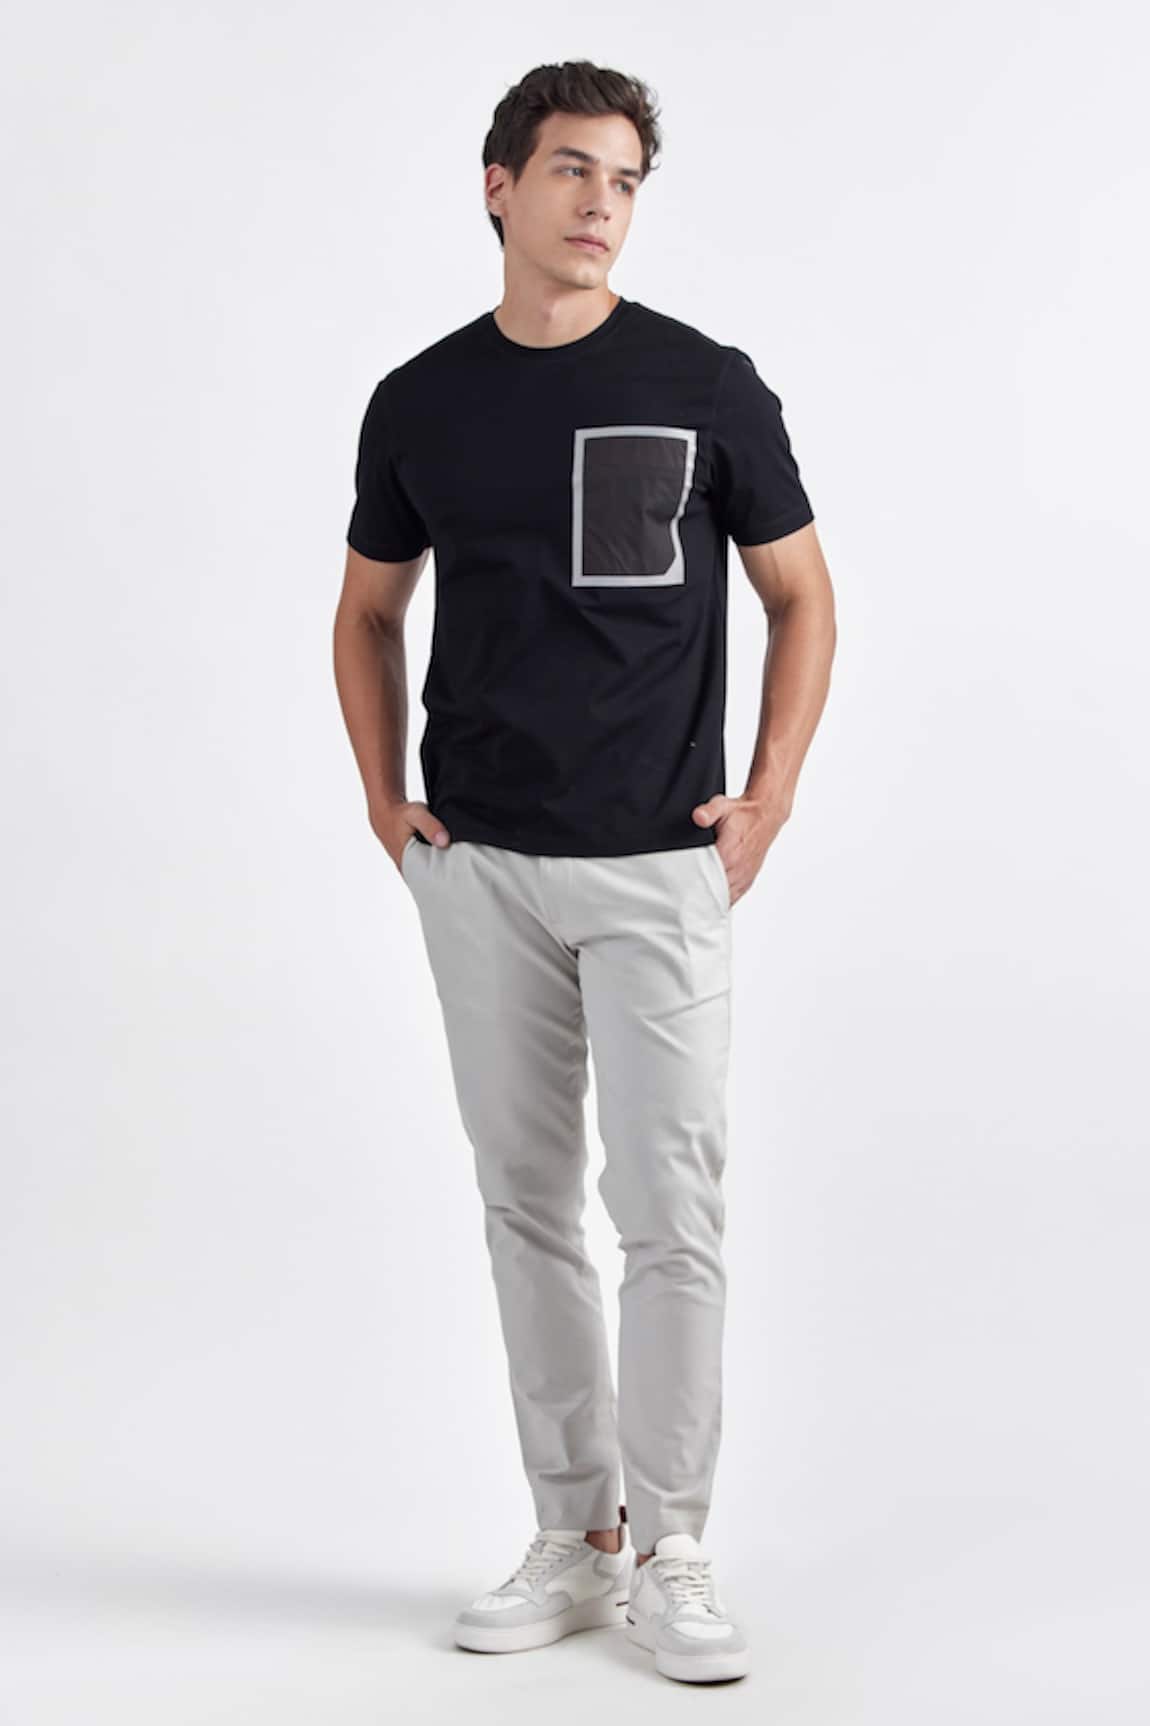 PERONA Zaid Placement Square Pattern Tee